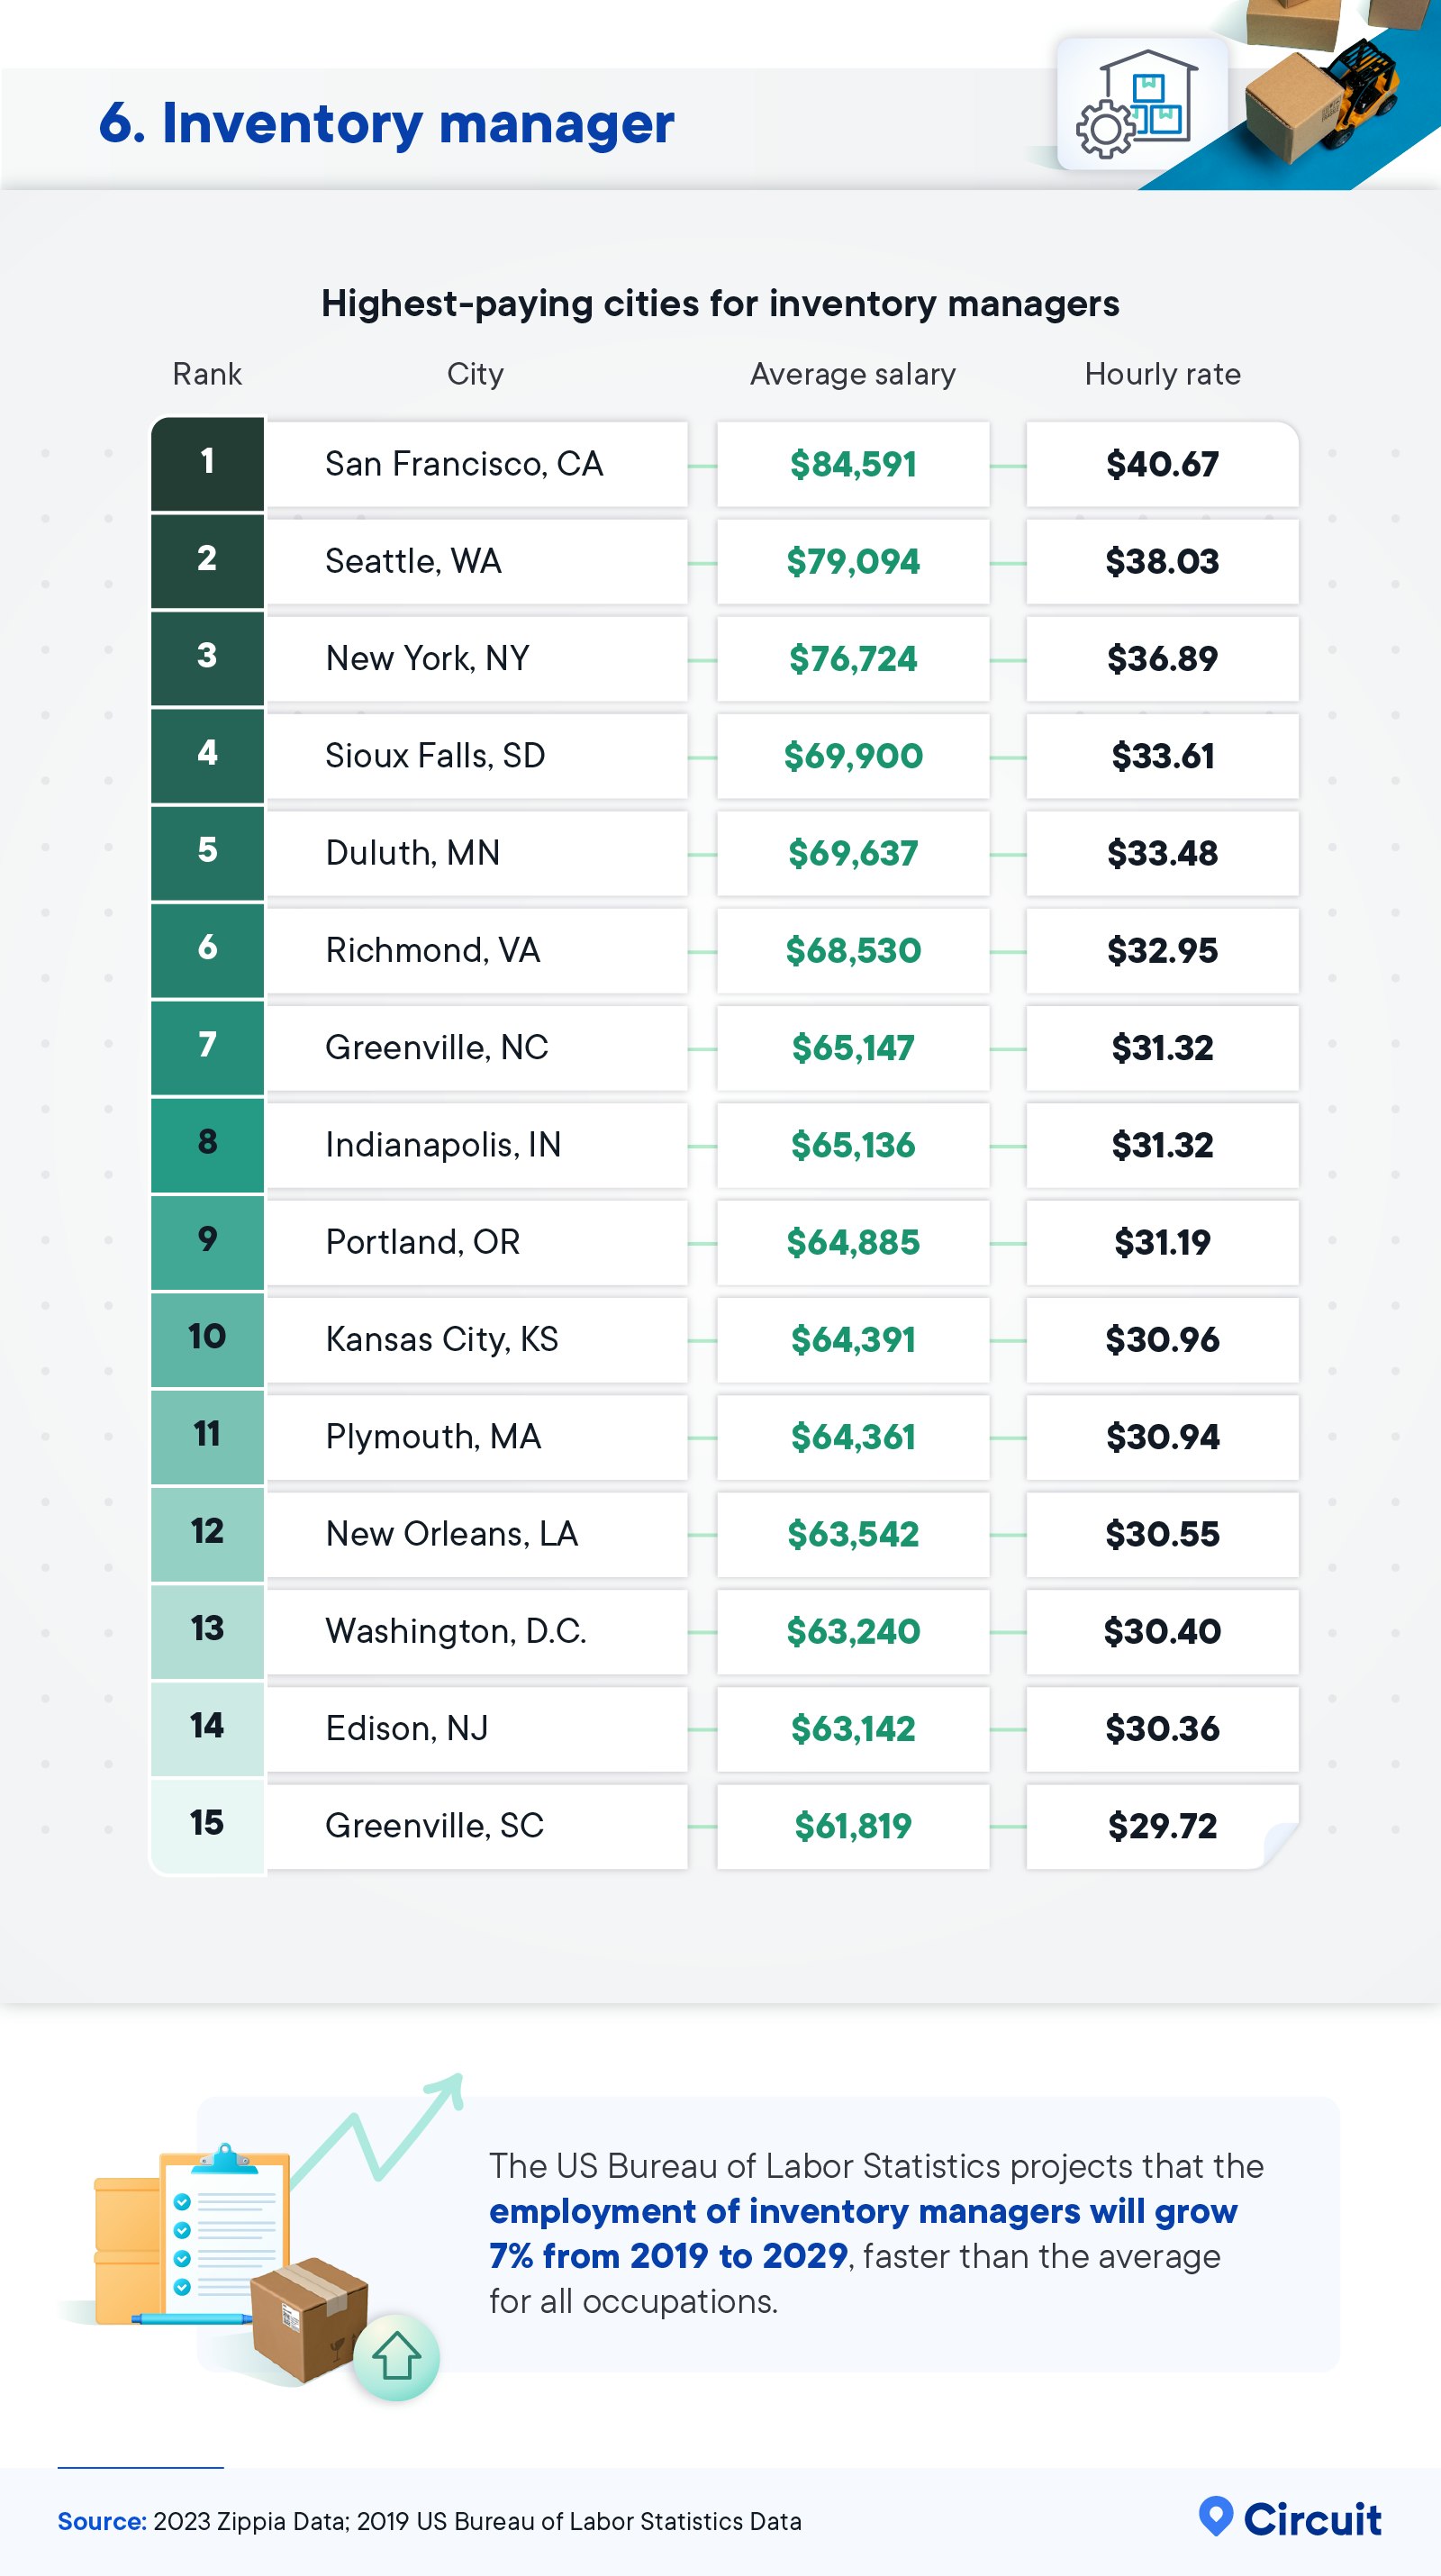 Highest-paying cities for inventory managers